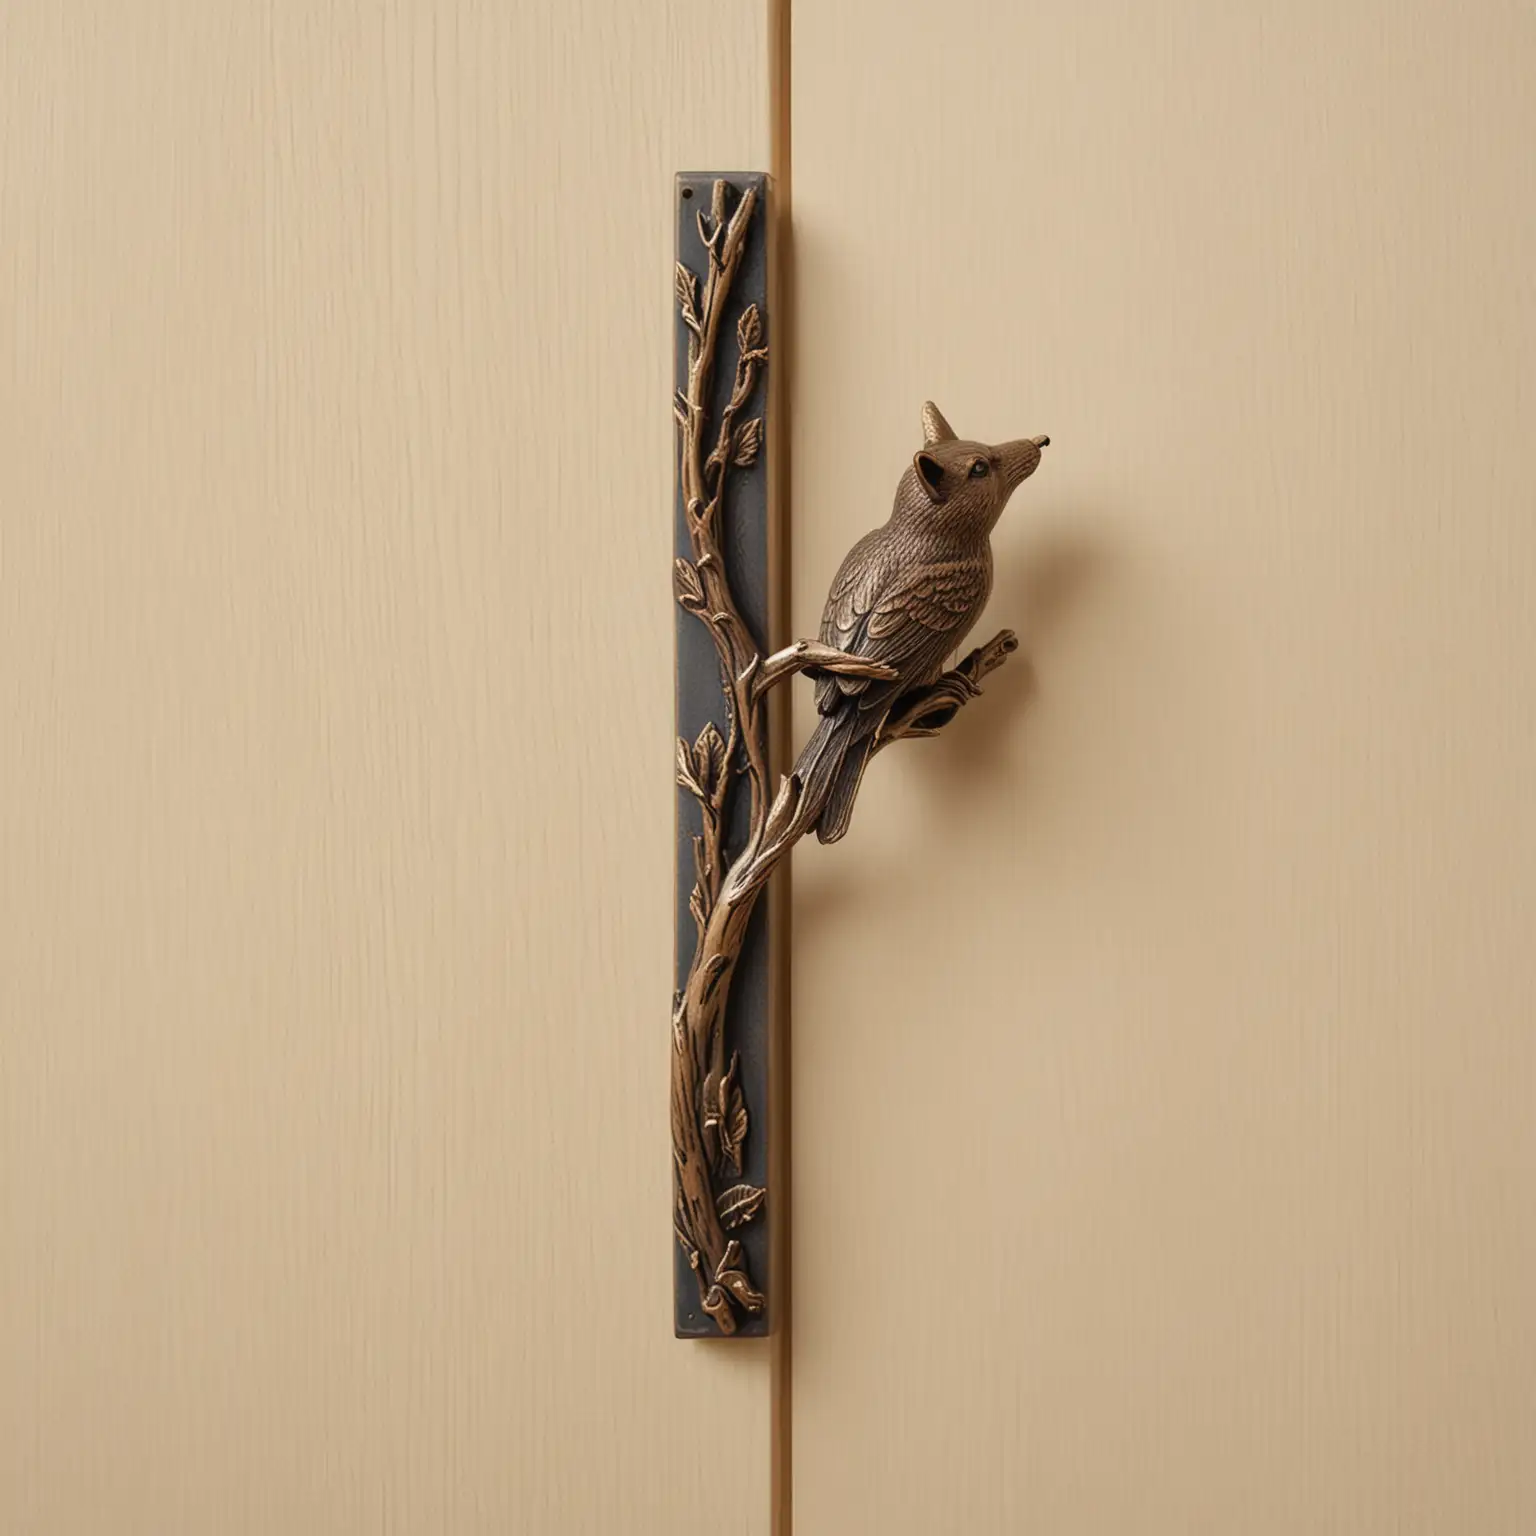 Cast in metal, a cabinet door handle in the shape of a simple branch is attached at two vertical points to the cabinet door. A woodland animal is perched on the branch.